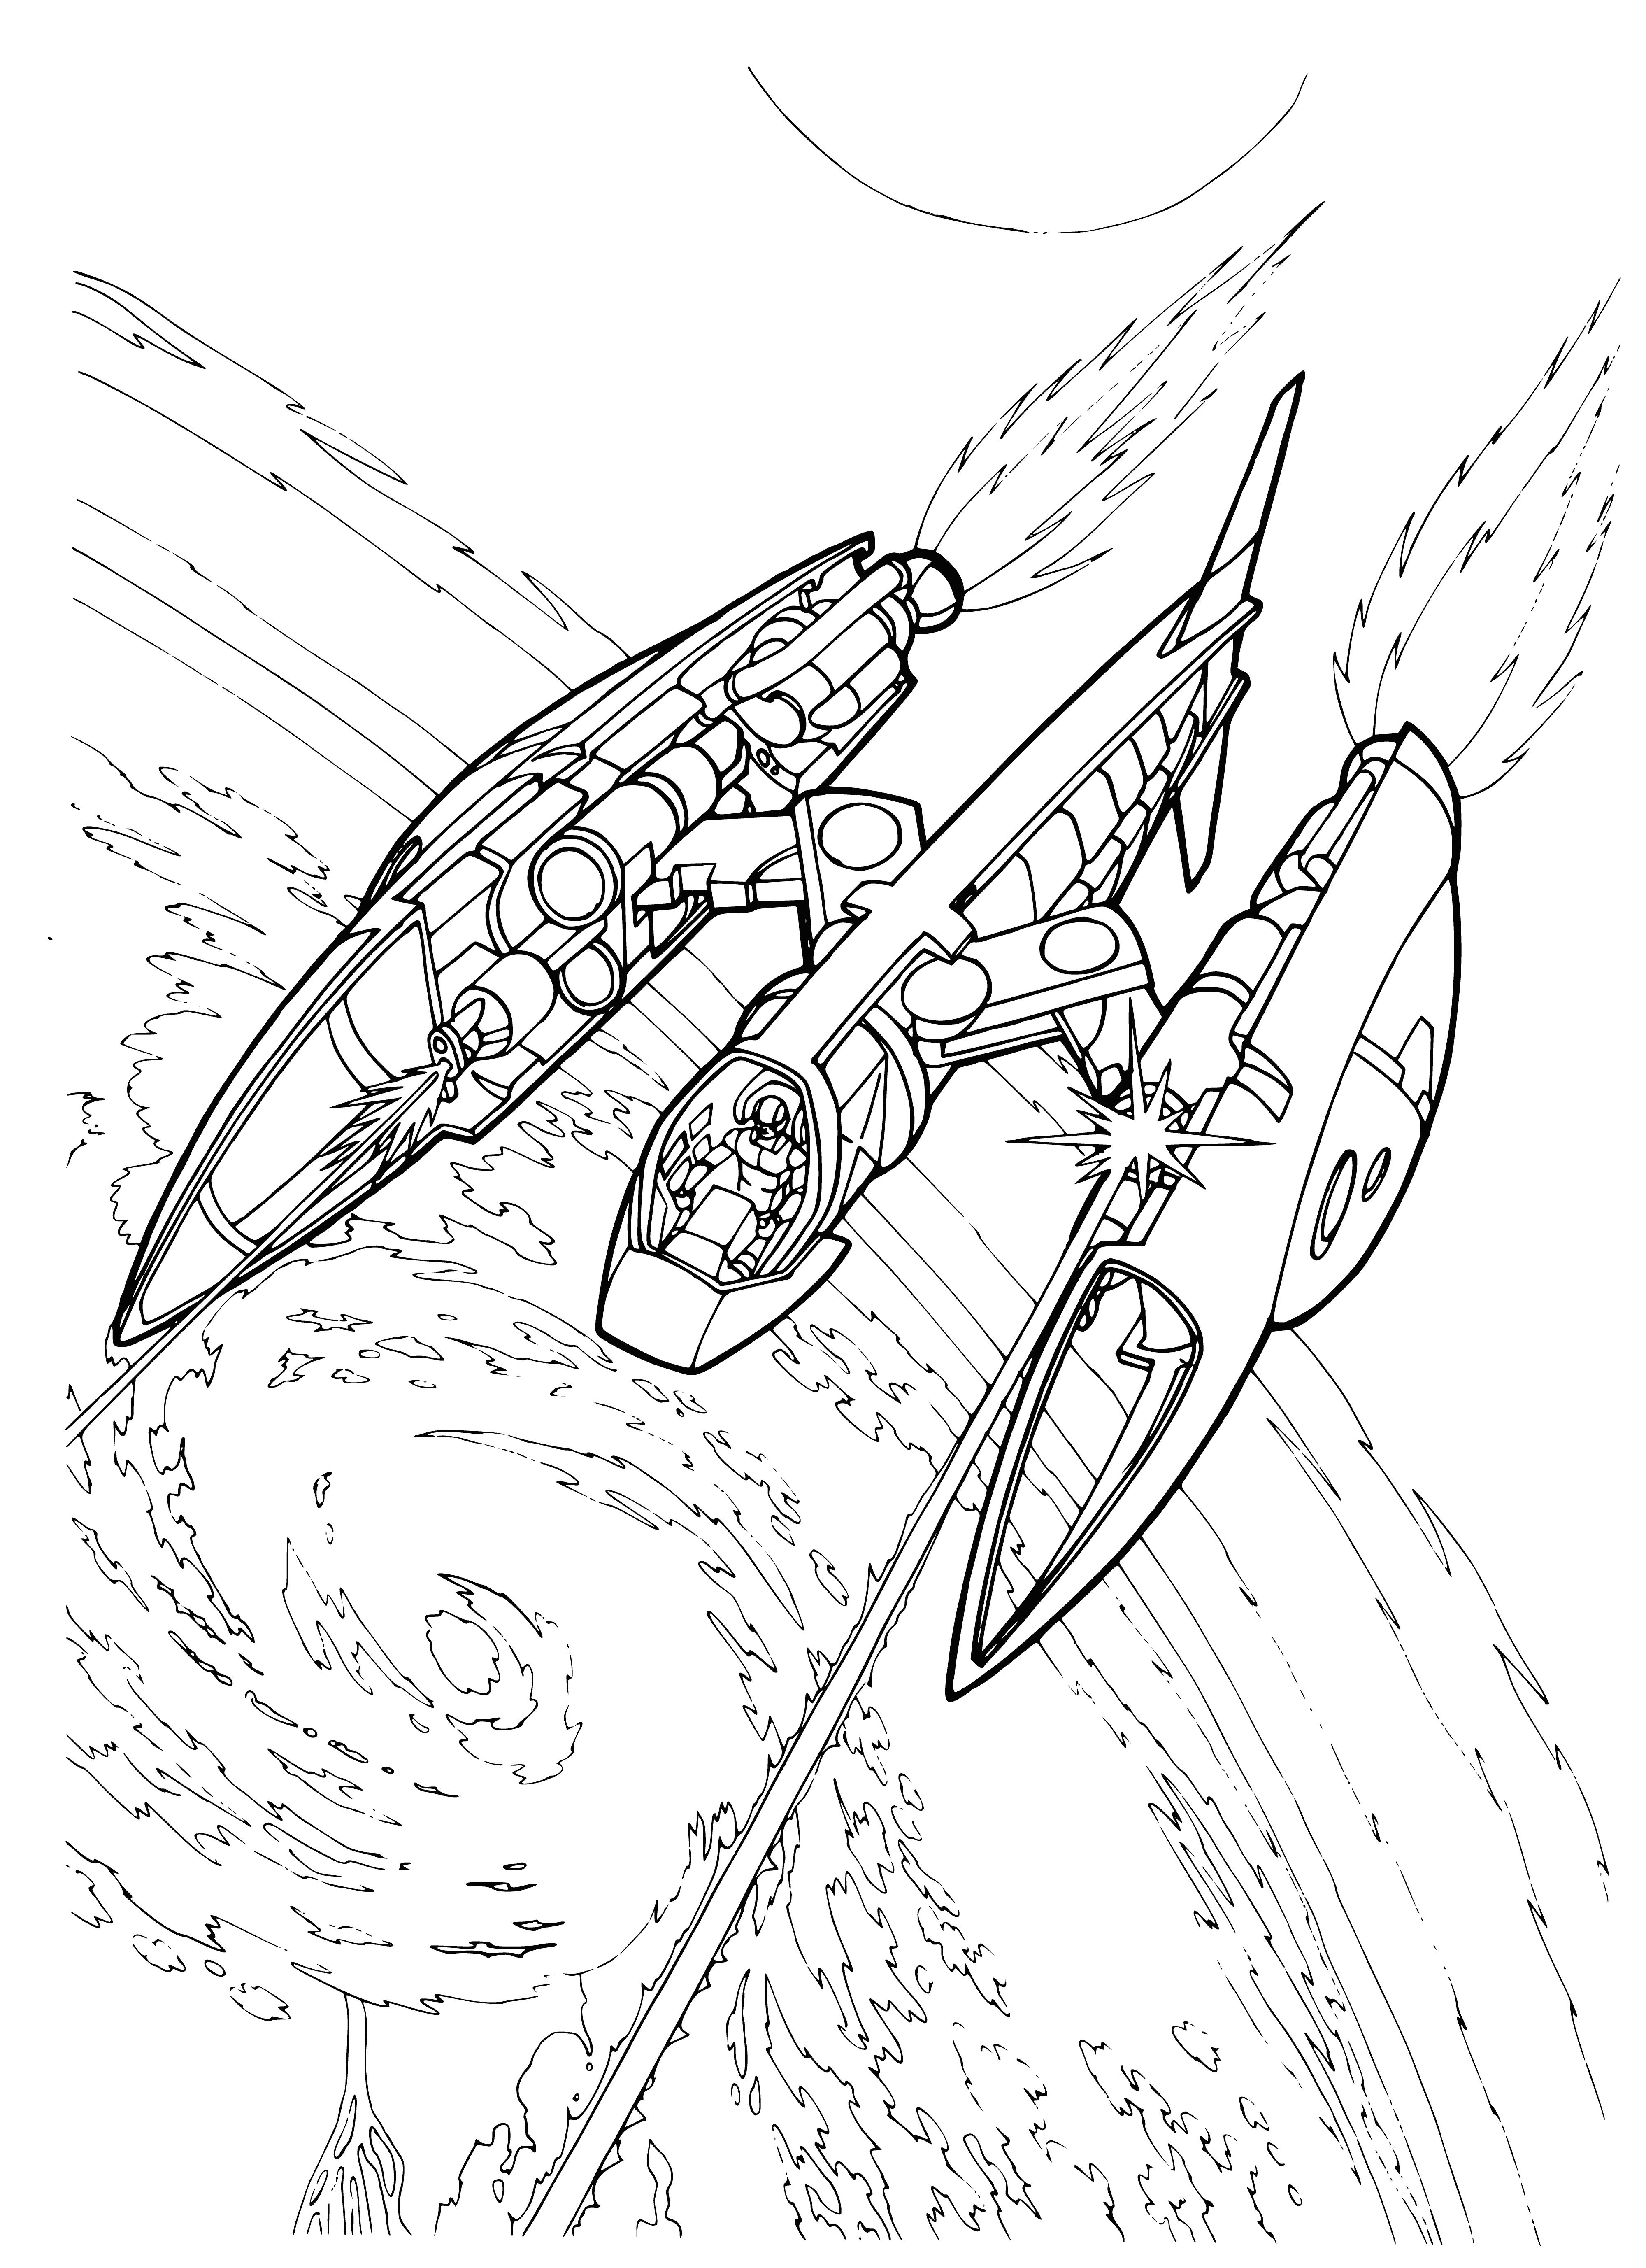 coloring page: Space fighter jets will be a common sight, with advanced tech and weapons to zip through the skies, making them a force to be reckoned with.